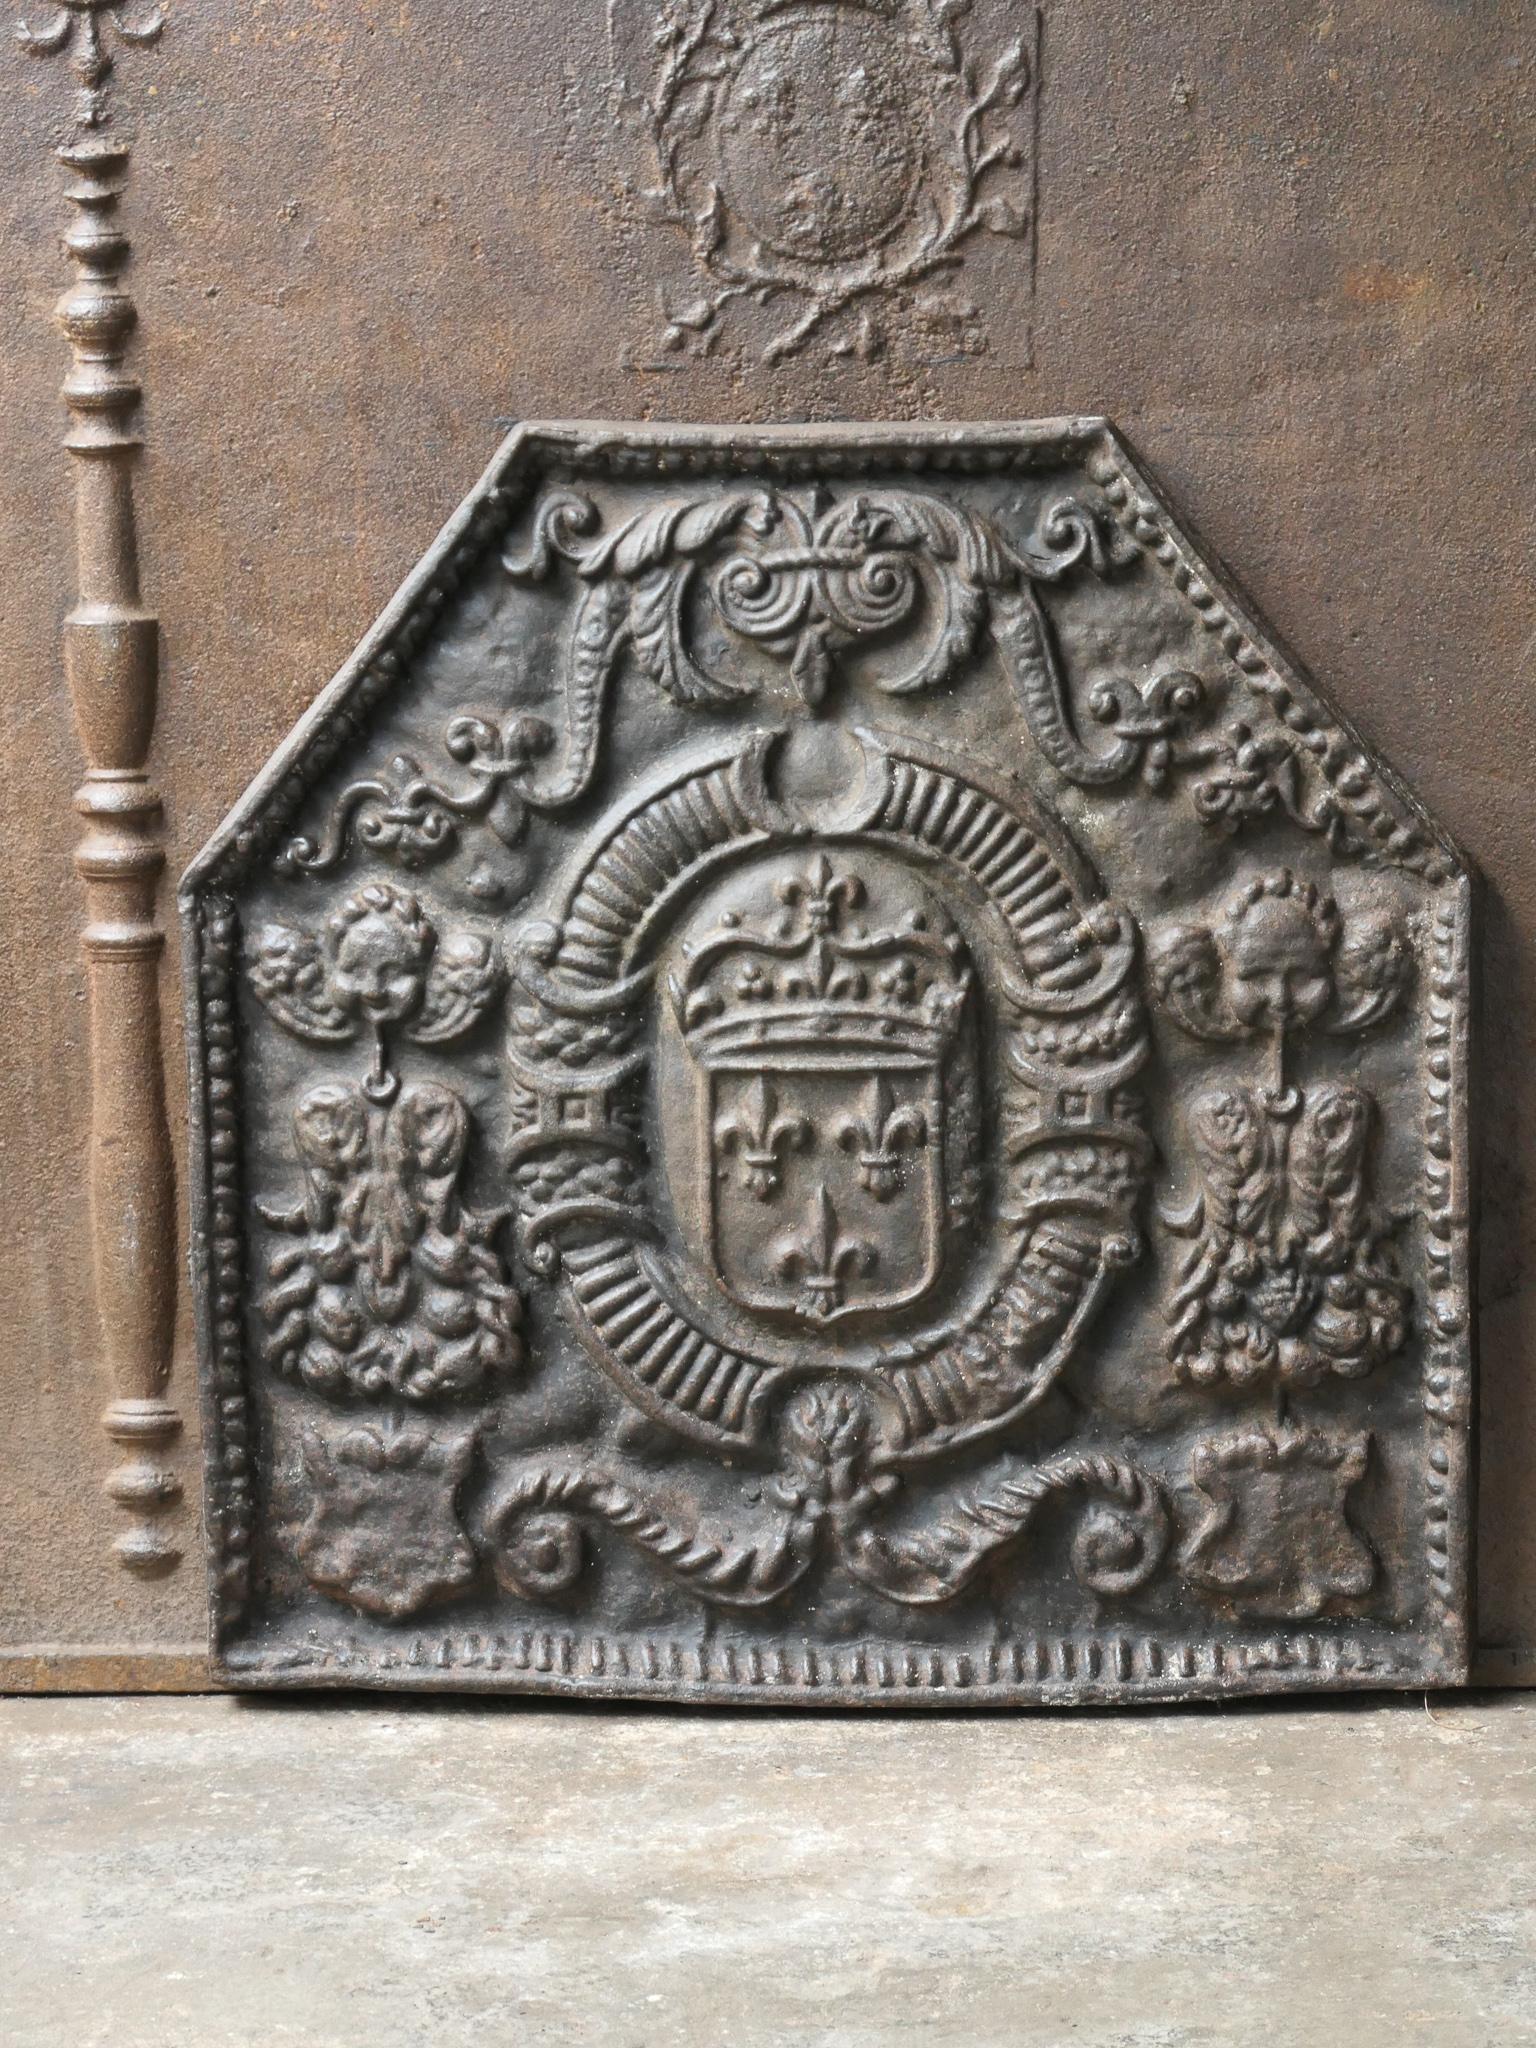 20th century French Louis XIII style fireback with the arms of France. Coat of arms of the House of Bourbon, an originally French royal house that became a major dynasty in Europe. It delivered kings for Spain (Navarra), France, both Sicilies and